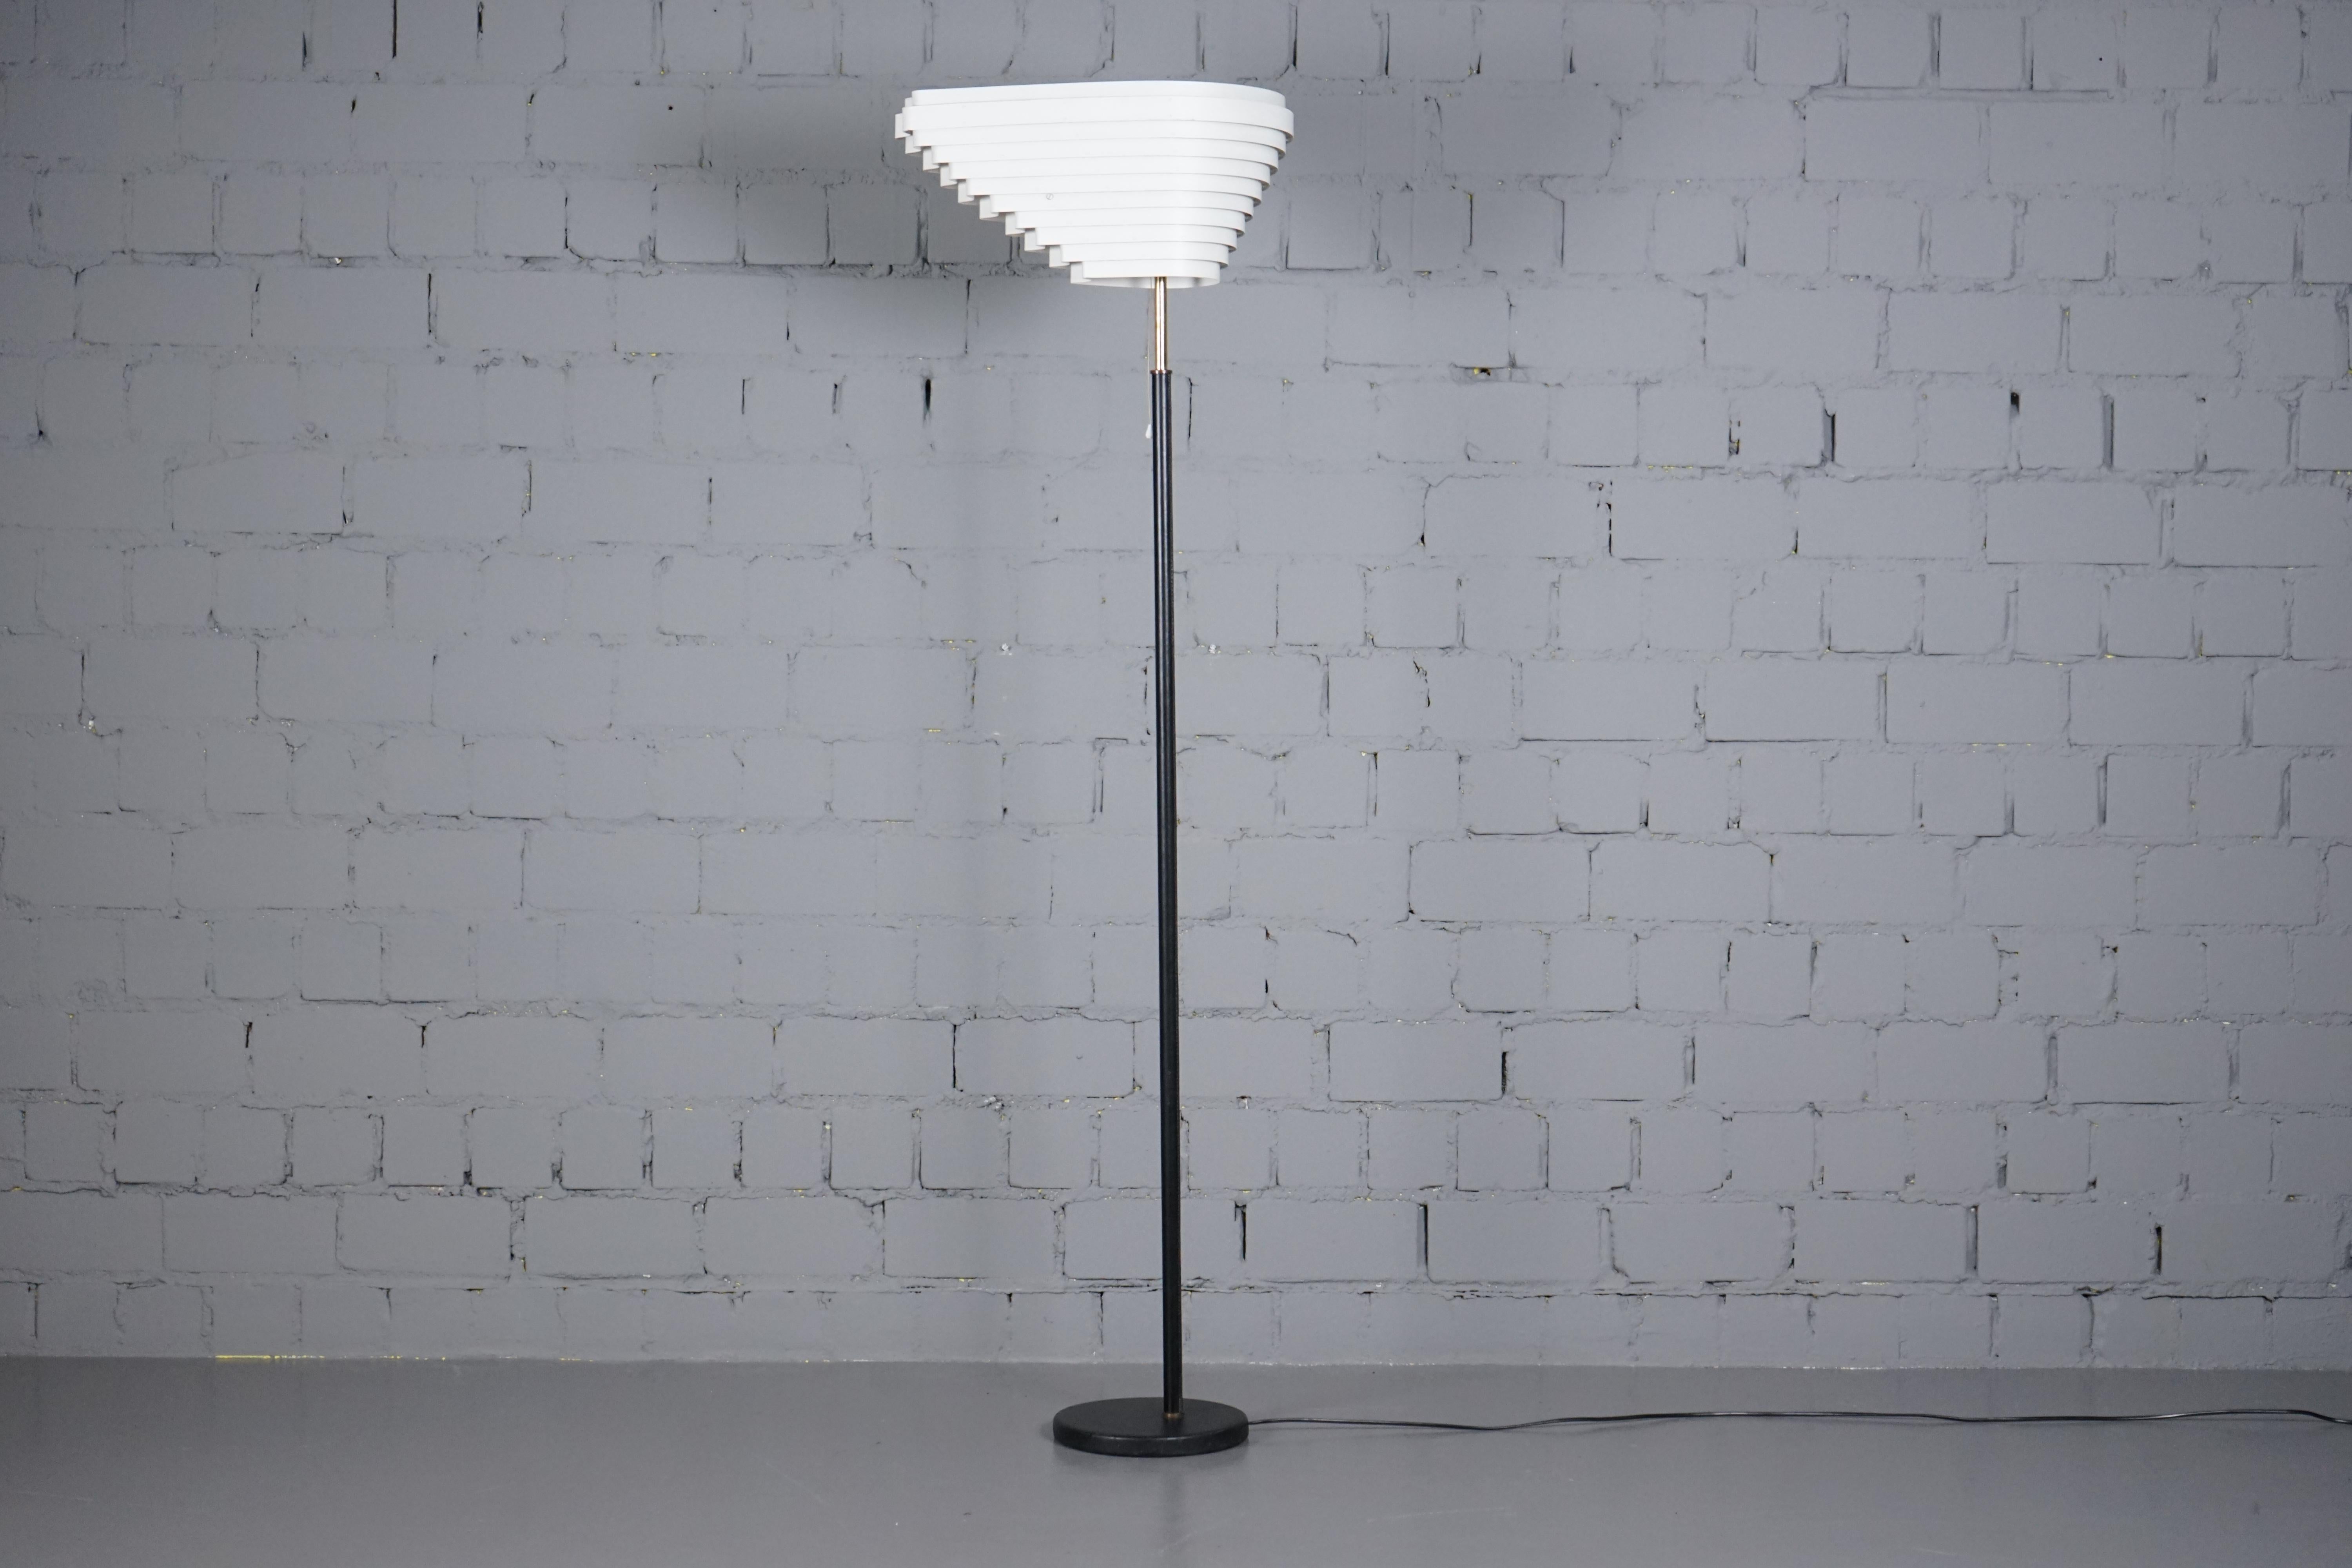 Iconic 1. Edition A805 Angel Wing Floor Lamp by Alvar Aalto for Valaistustyö from the 1950`s. 
The lamp is in original condition with and shows wear consistent with age and use. The shade has its original paint.